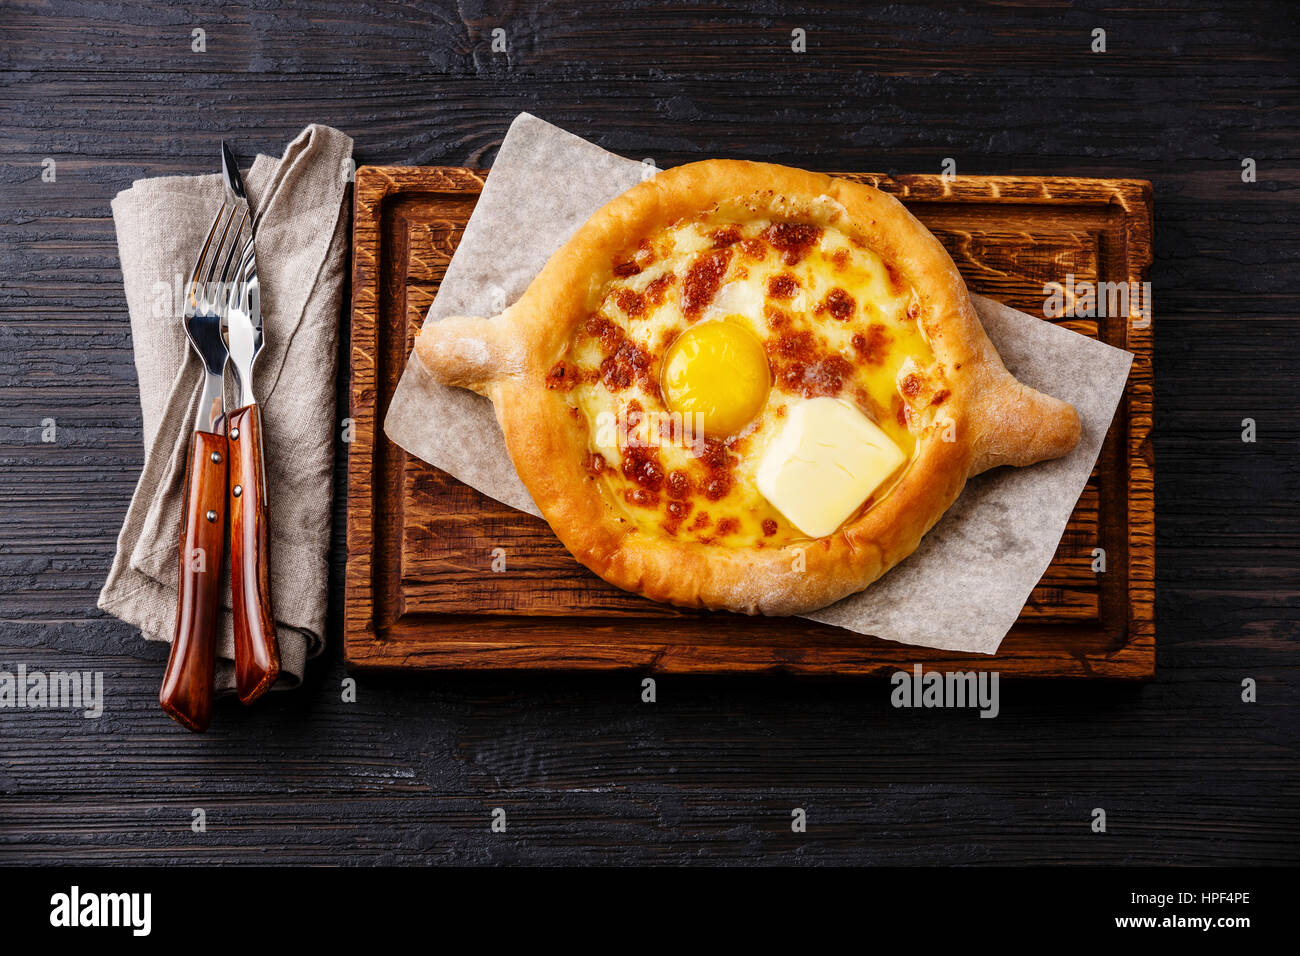 Ajarian Khachapuri traditional Georgian cheese pastry on burned black wooden background Stock Photo